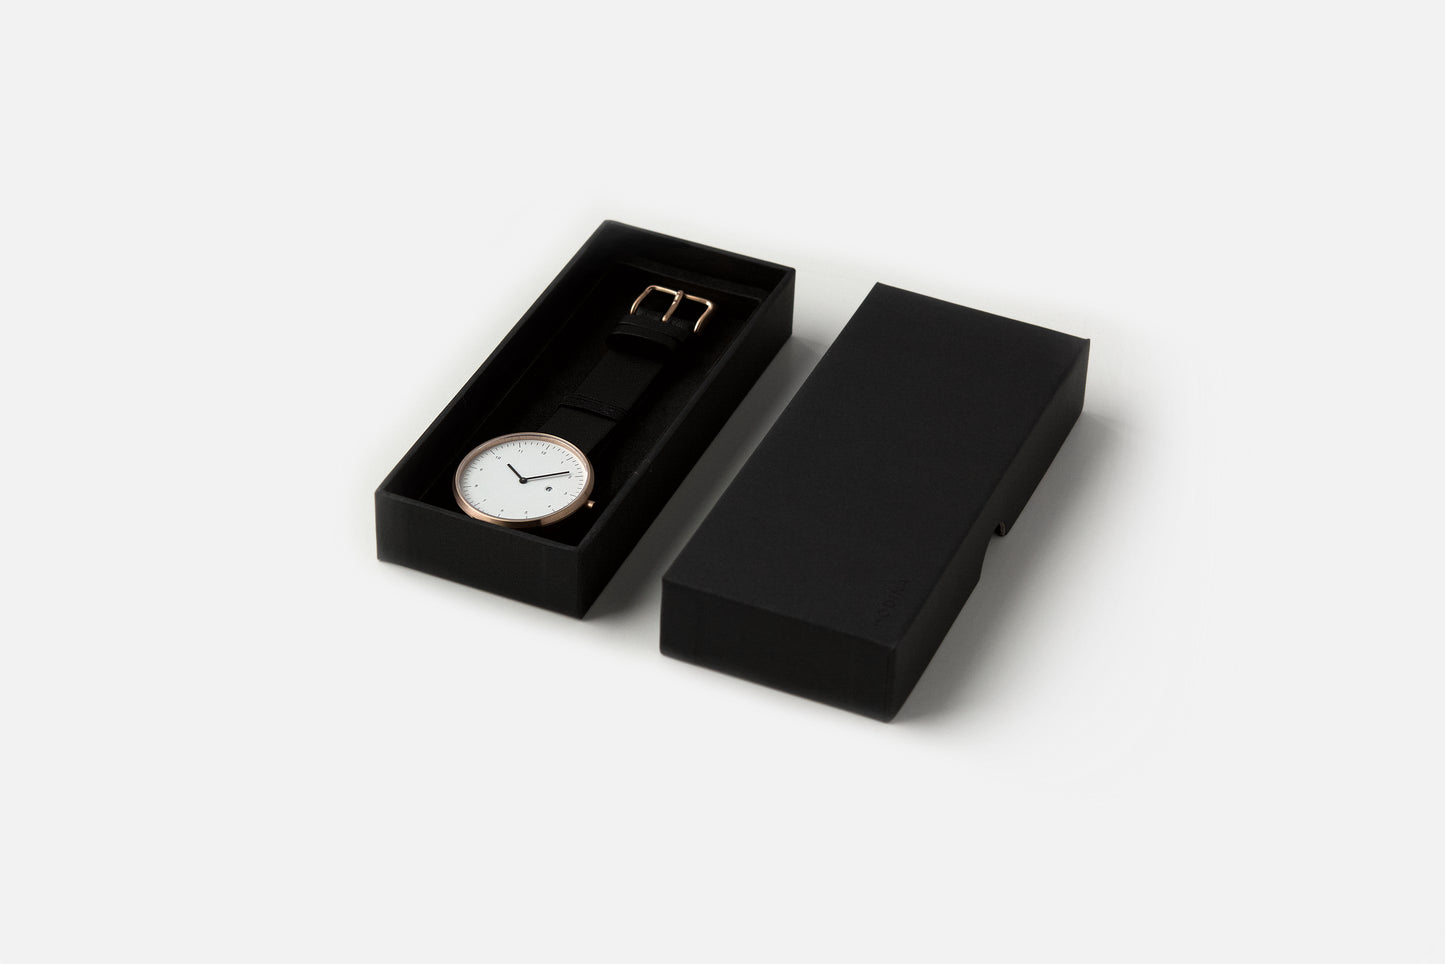 Oslo Rose Gold watch pictured in its packaging